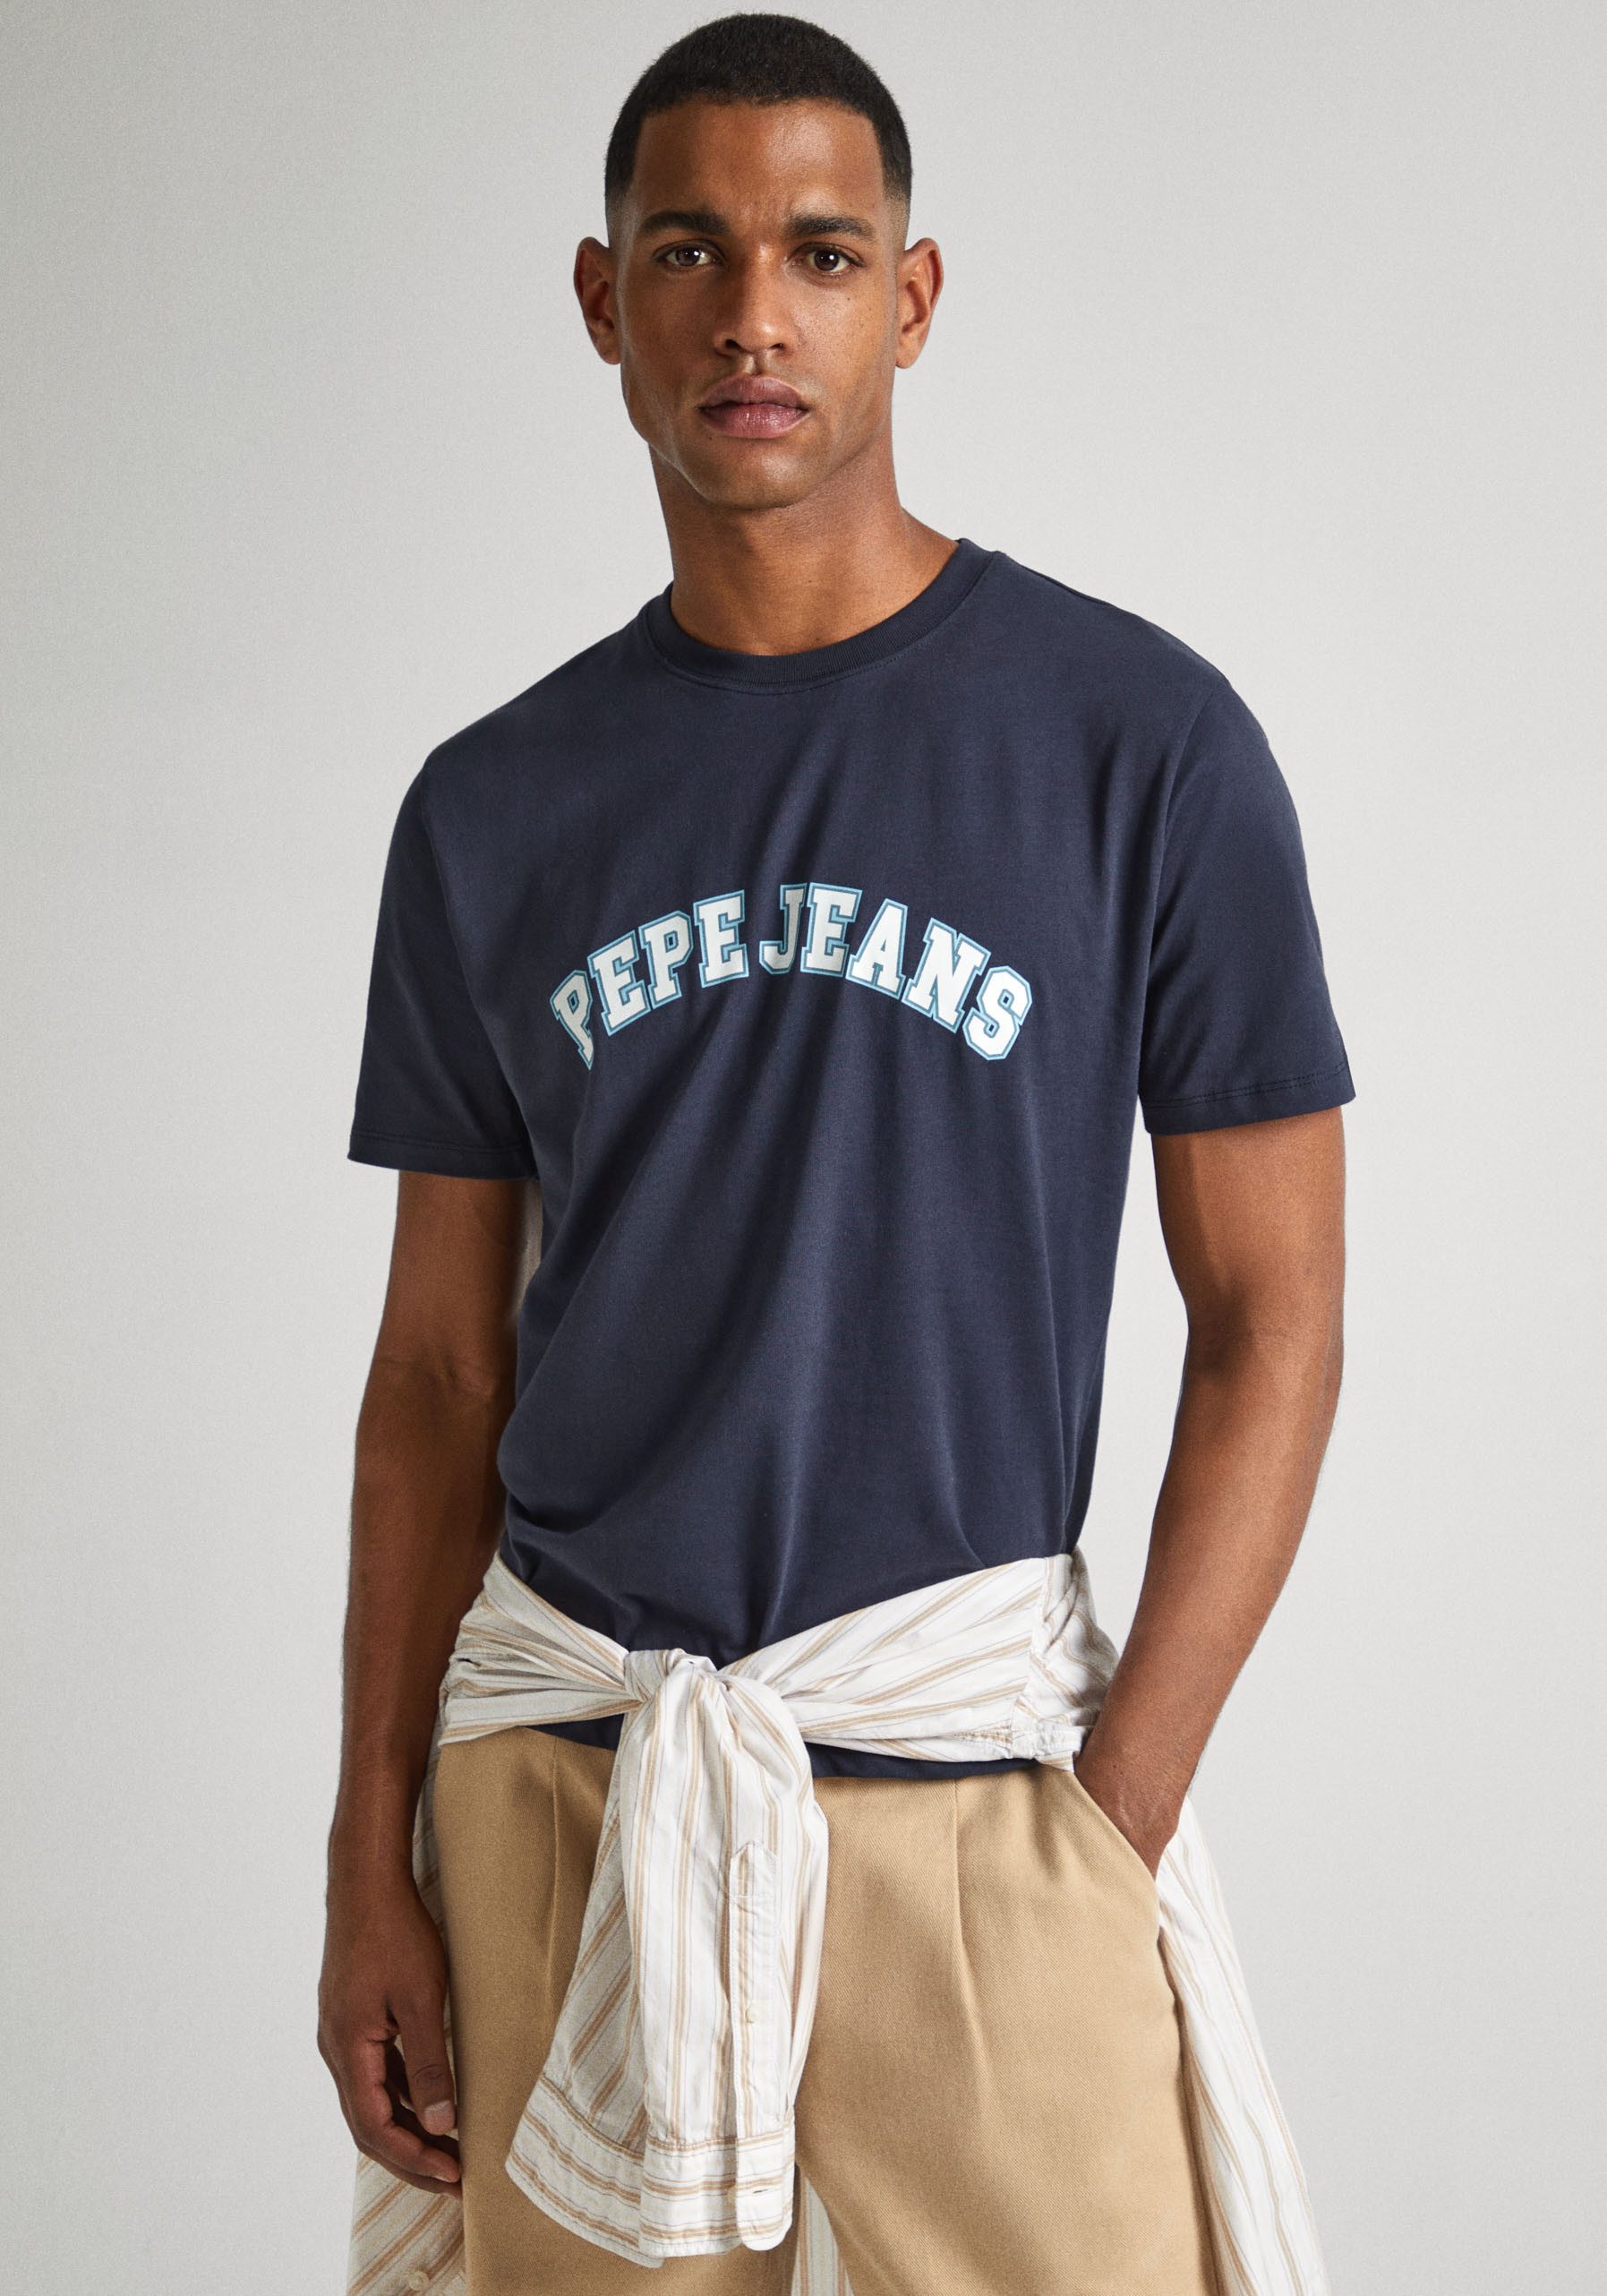 Pepe Jeans T-shirt Cle t